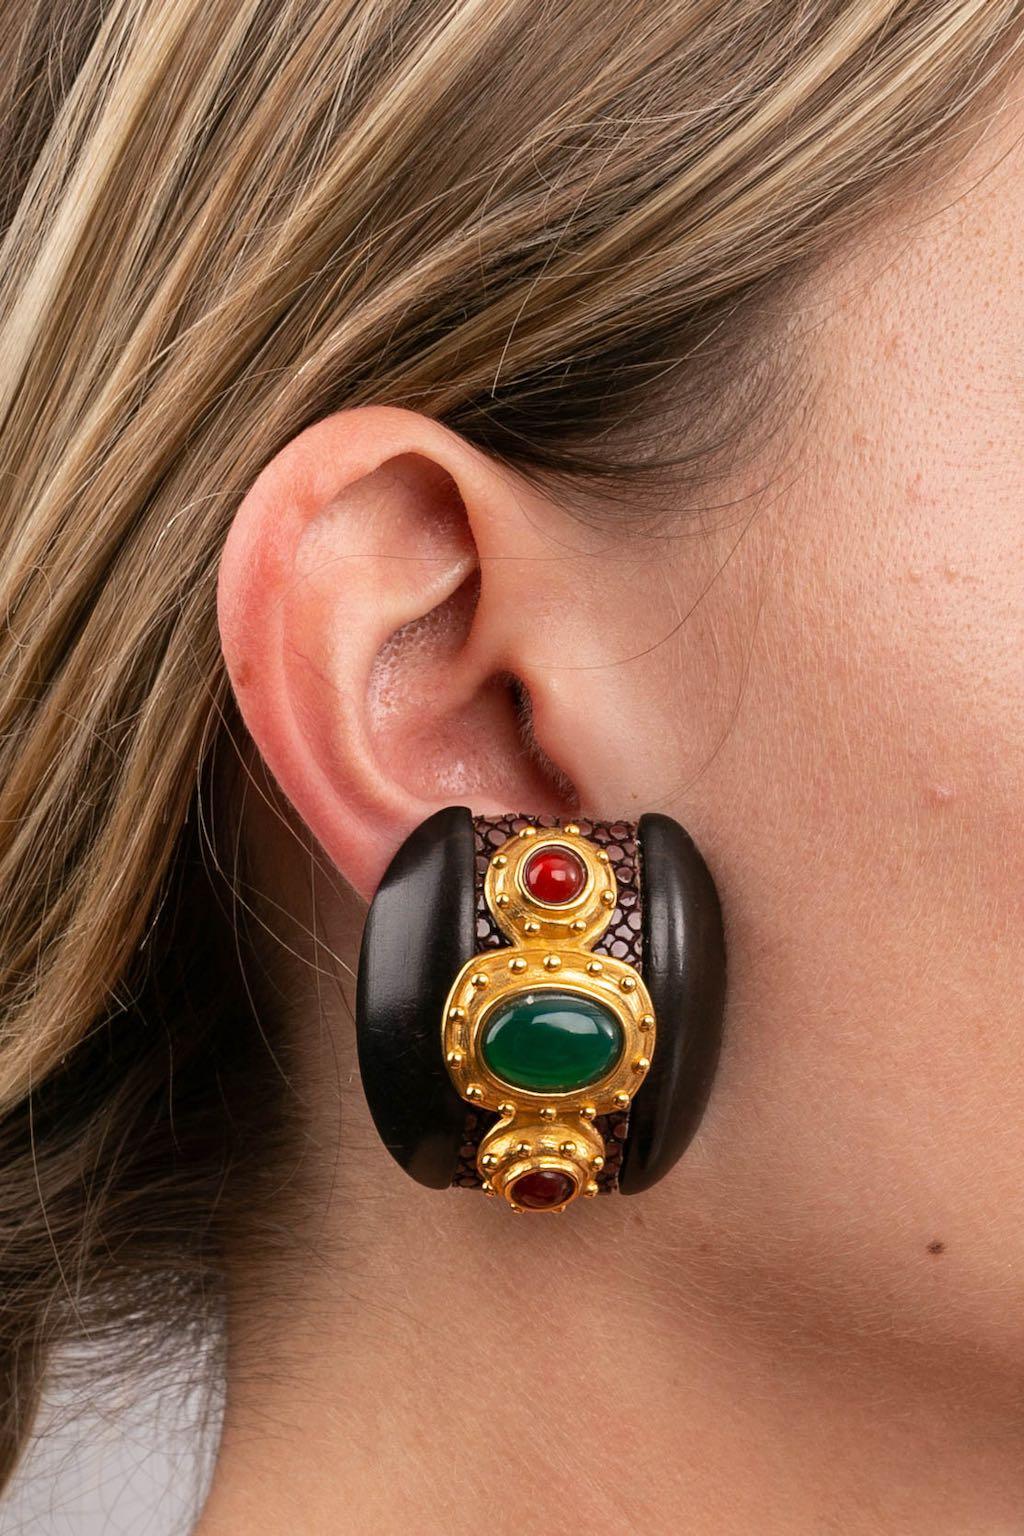 Gilted metal clip-on earrings with wood and coloured cabochons. Engraved signature at the back.

Additional information:
Dimensions: 3.5 cm x 4 cm (1.38